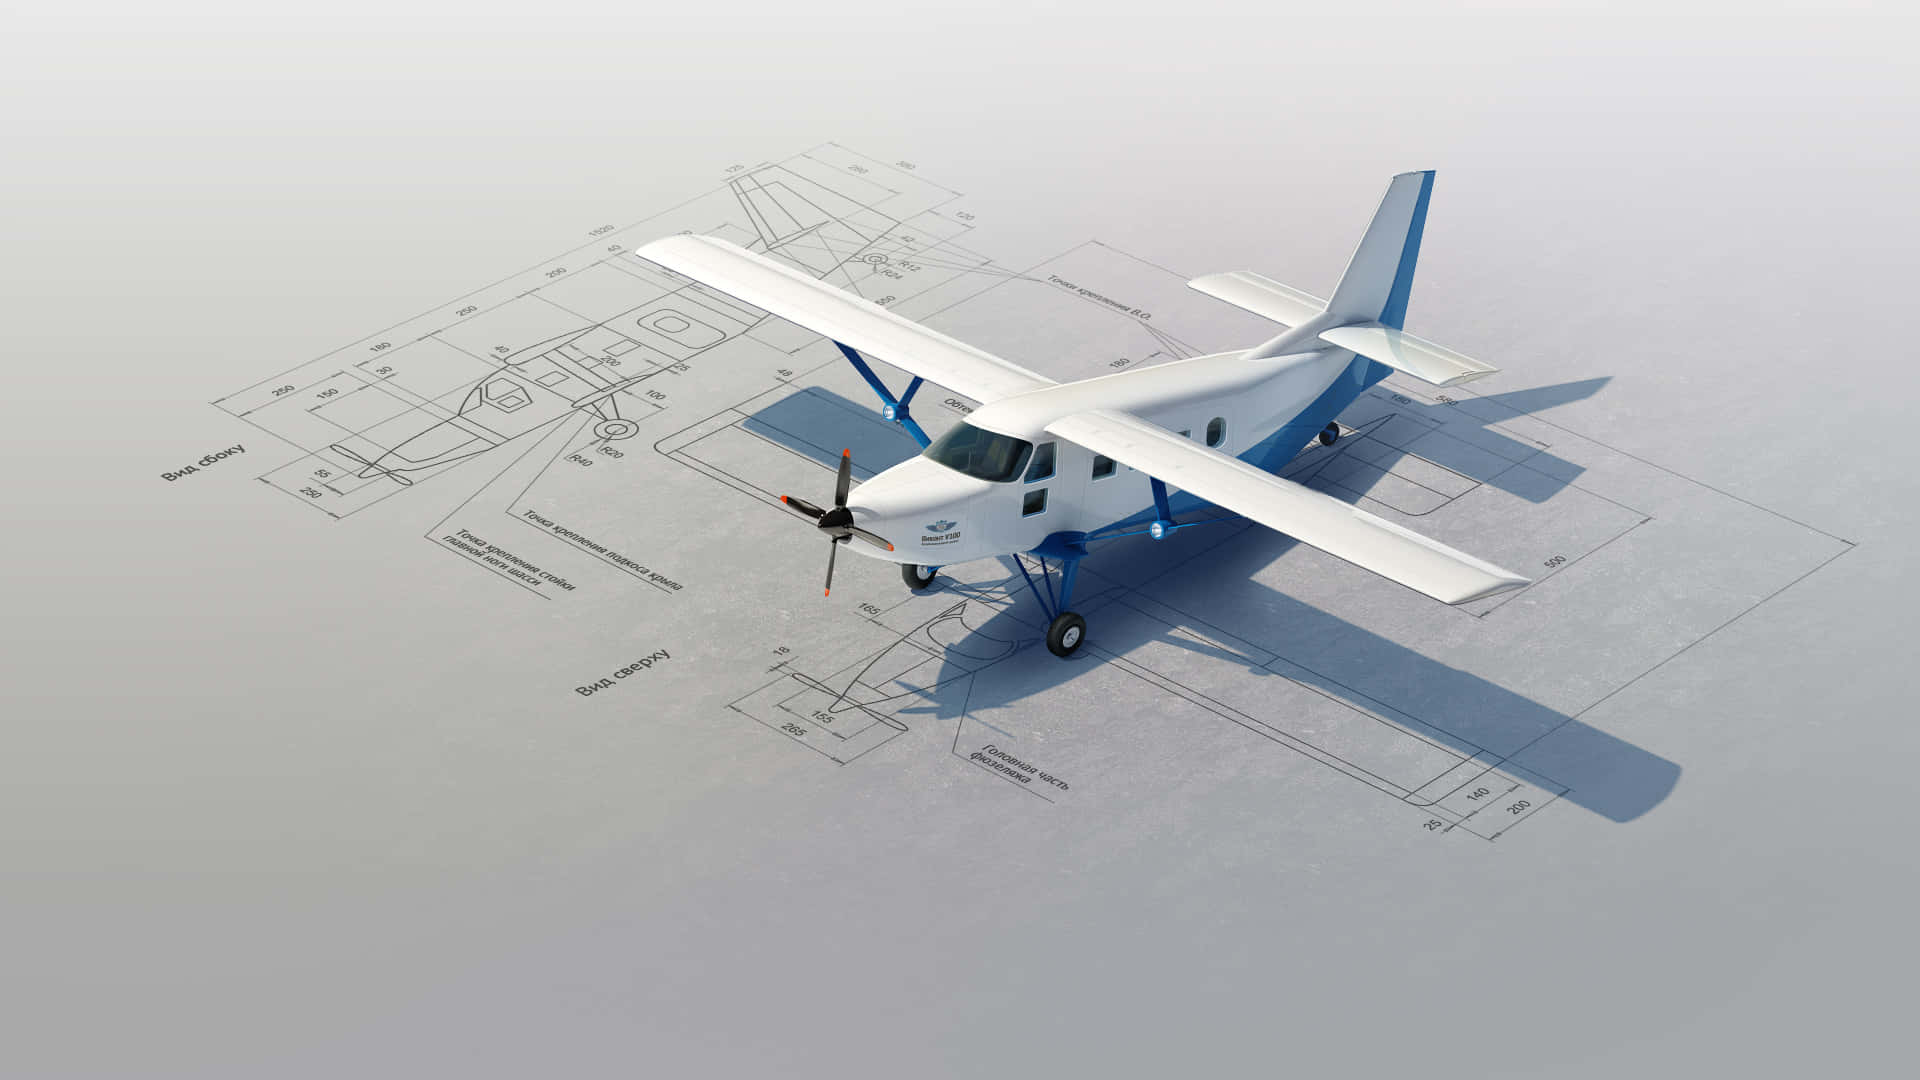 3D Design Of Small Airplane With Blueprint Wallpaper